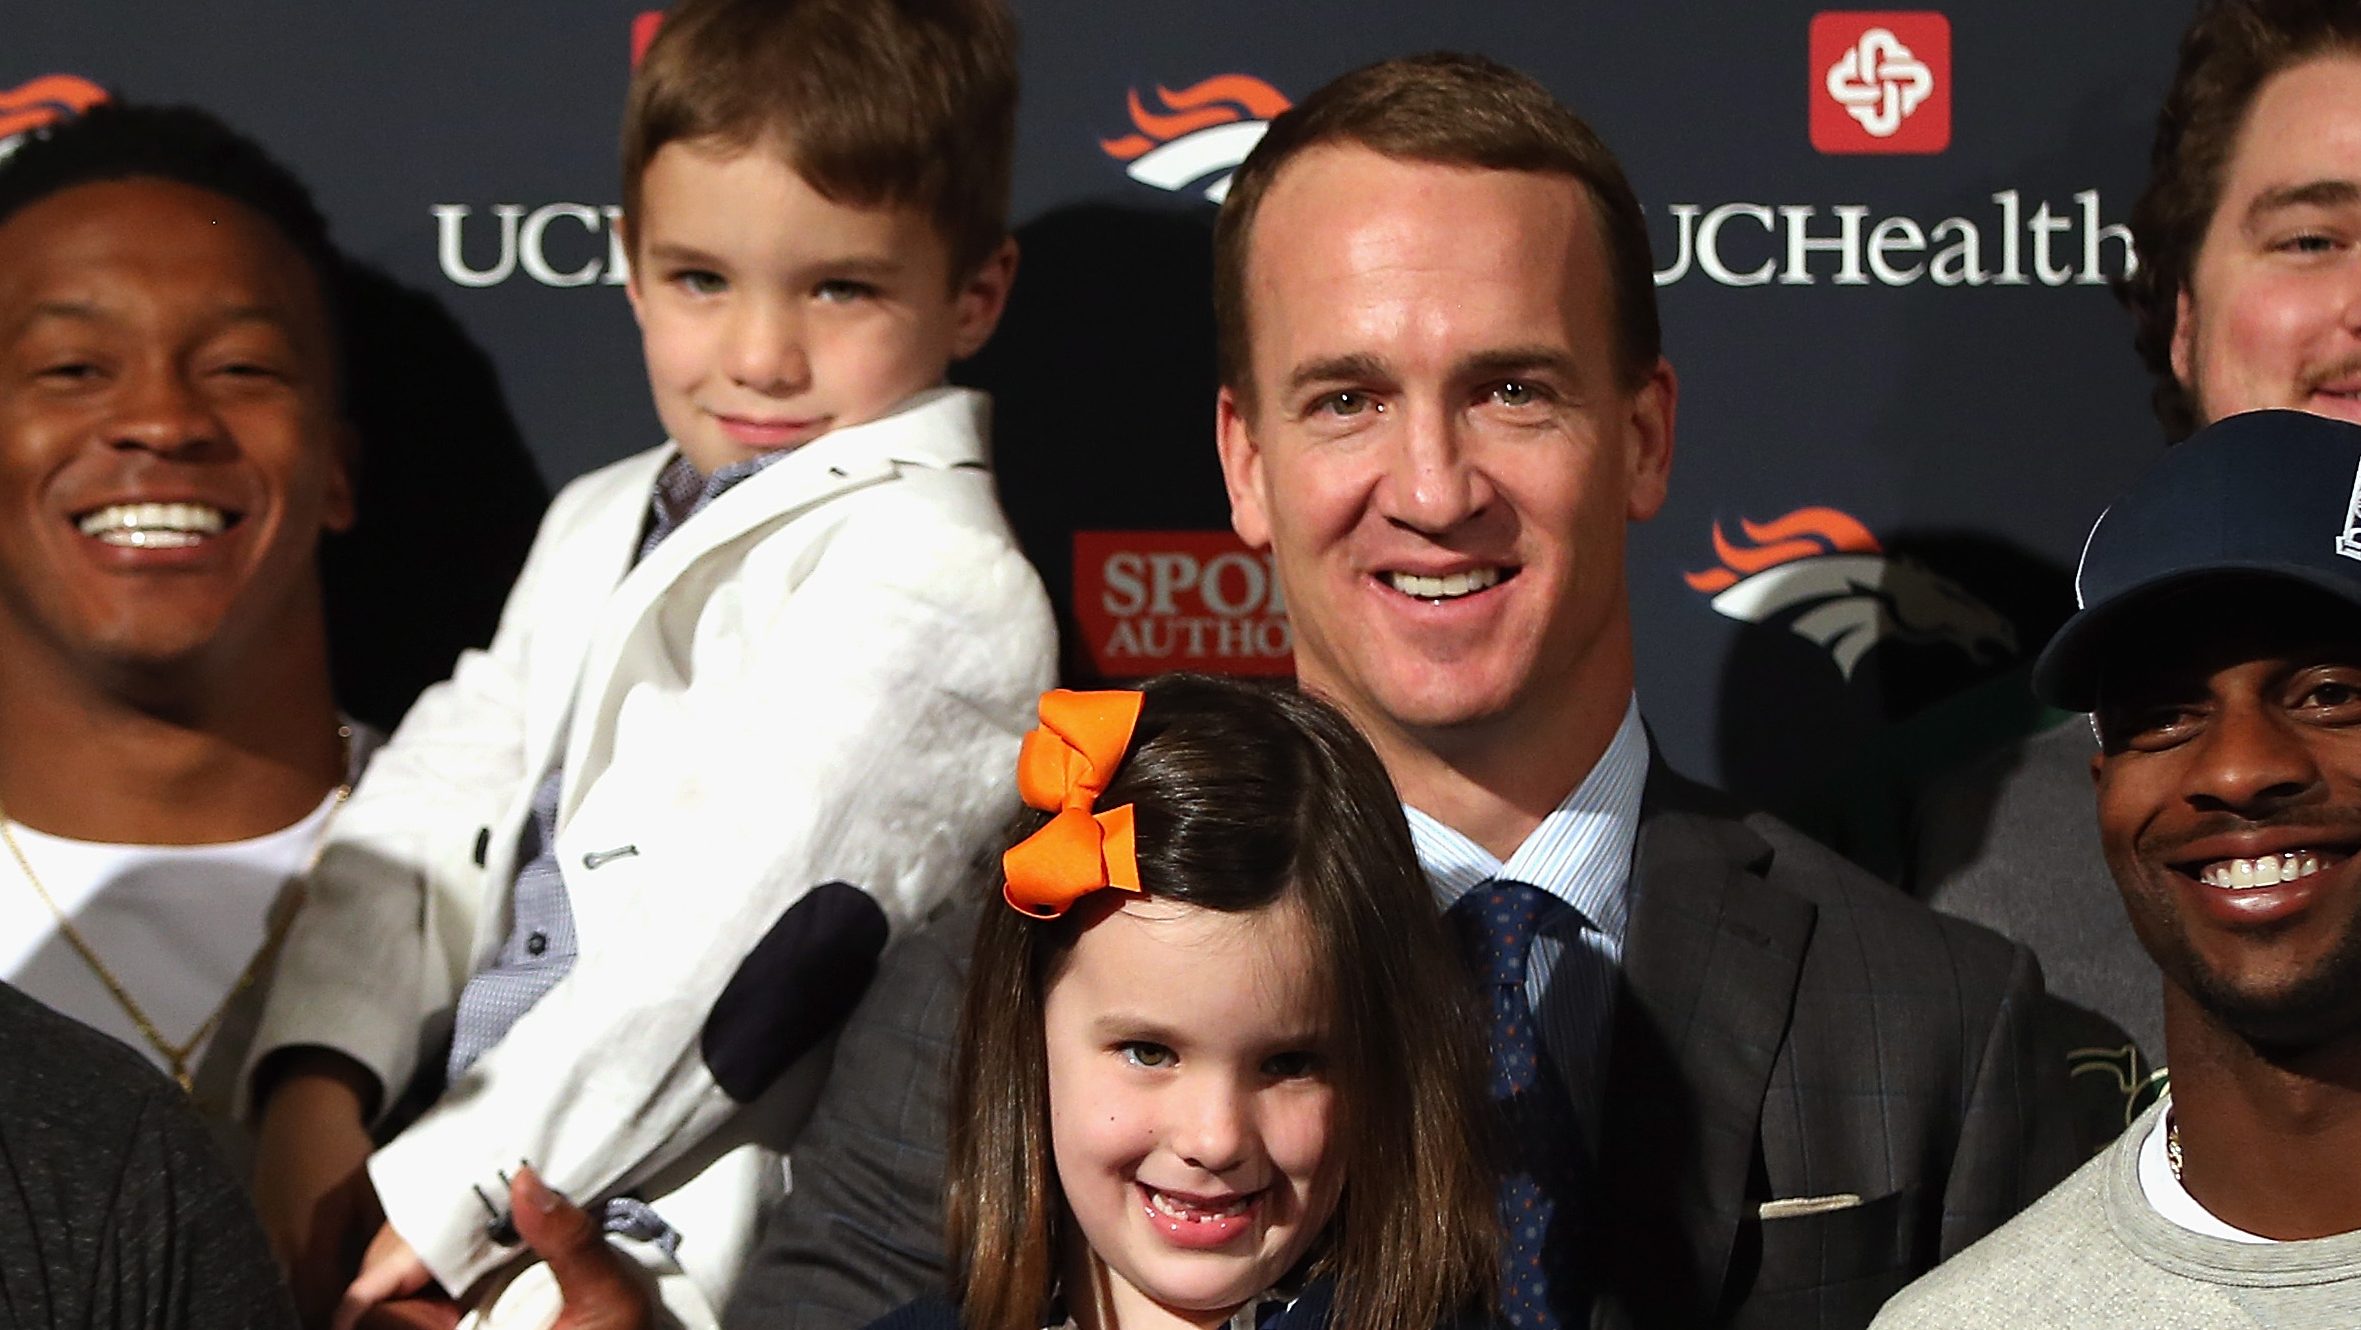 Ashley Manning, Peyton’s Wife 5 Fast Facts to Know